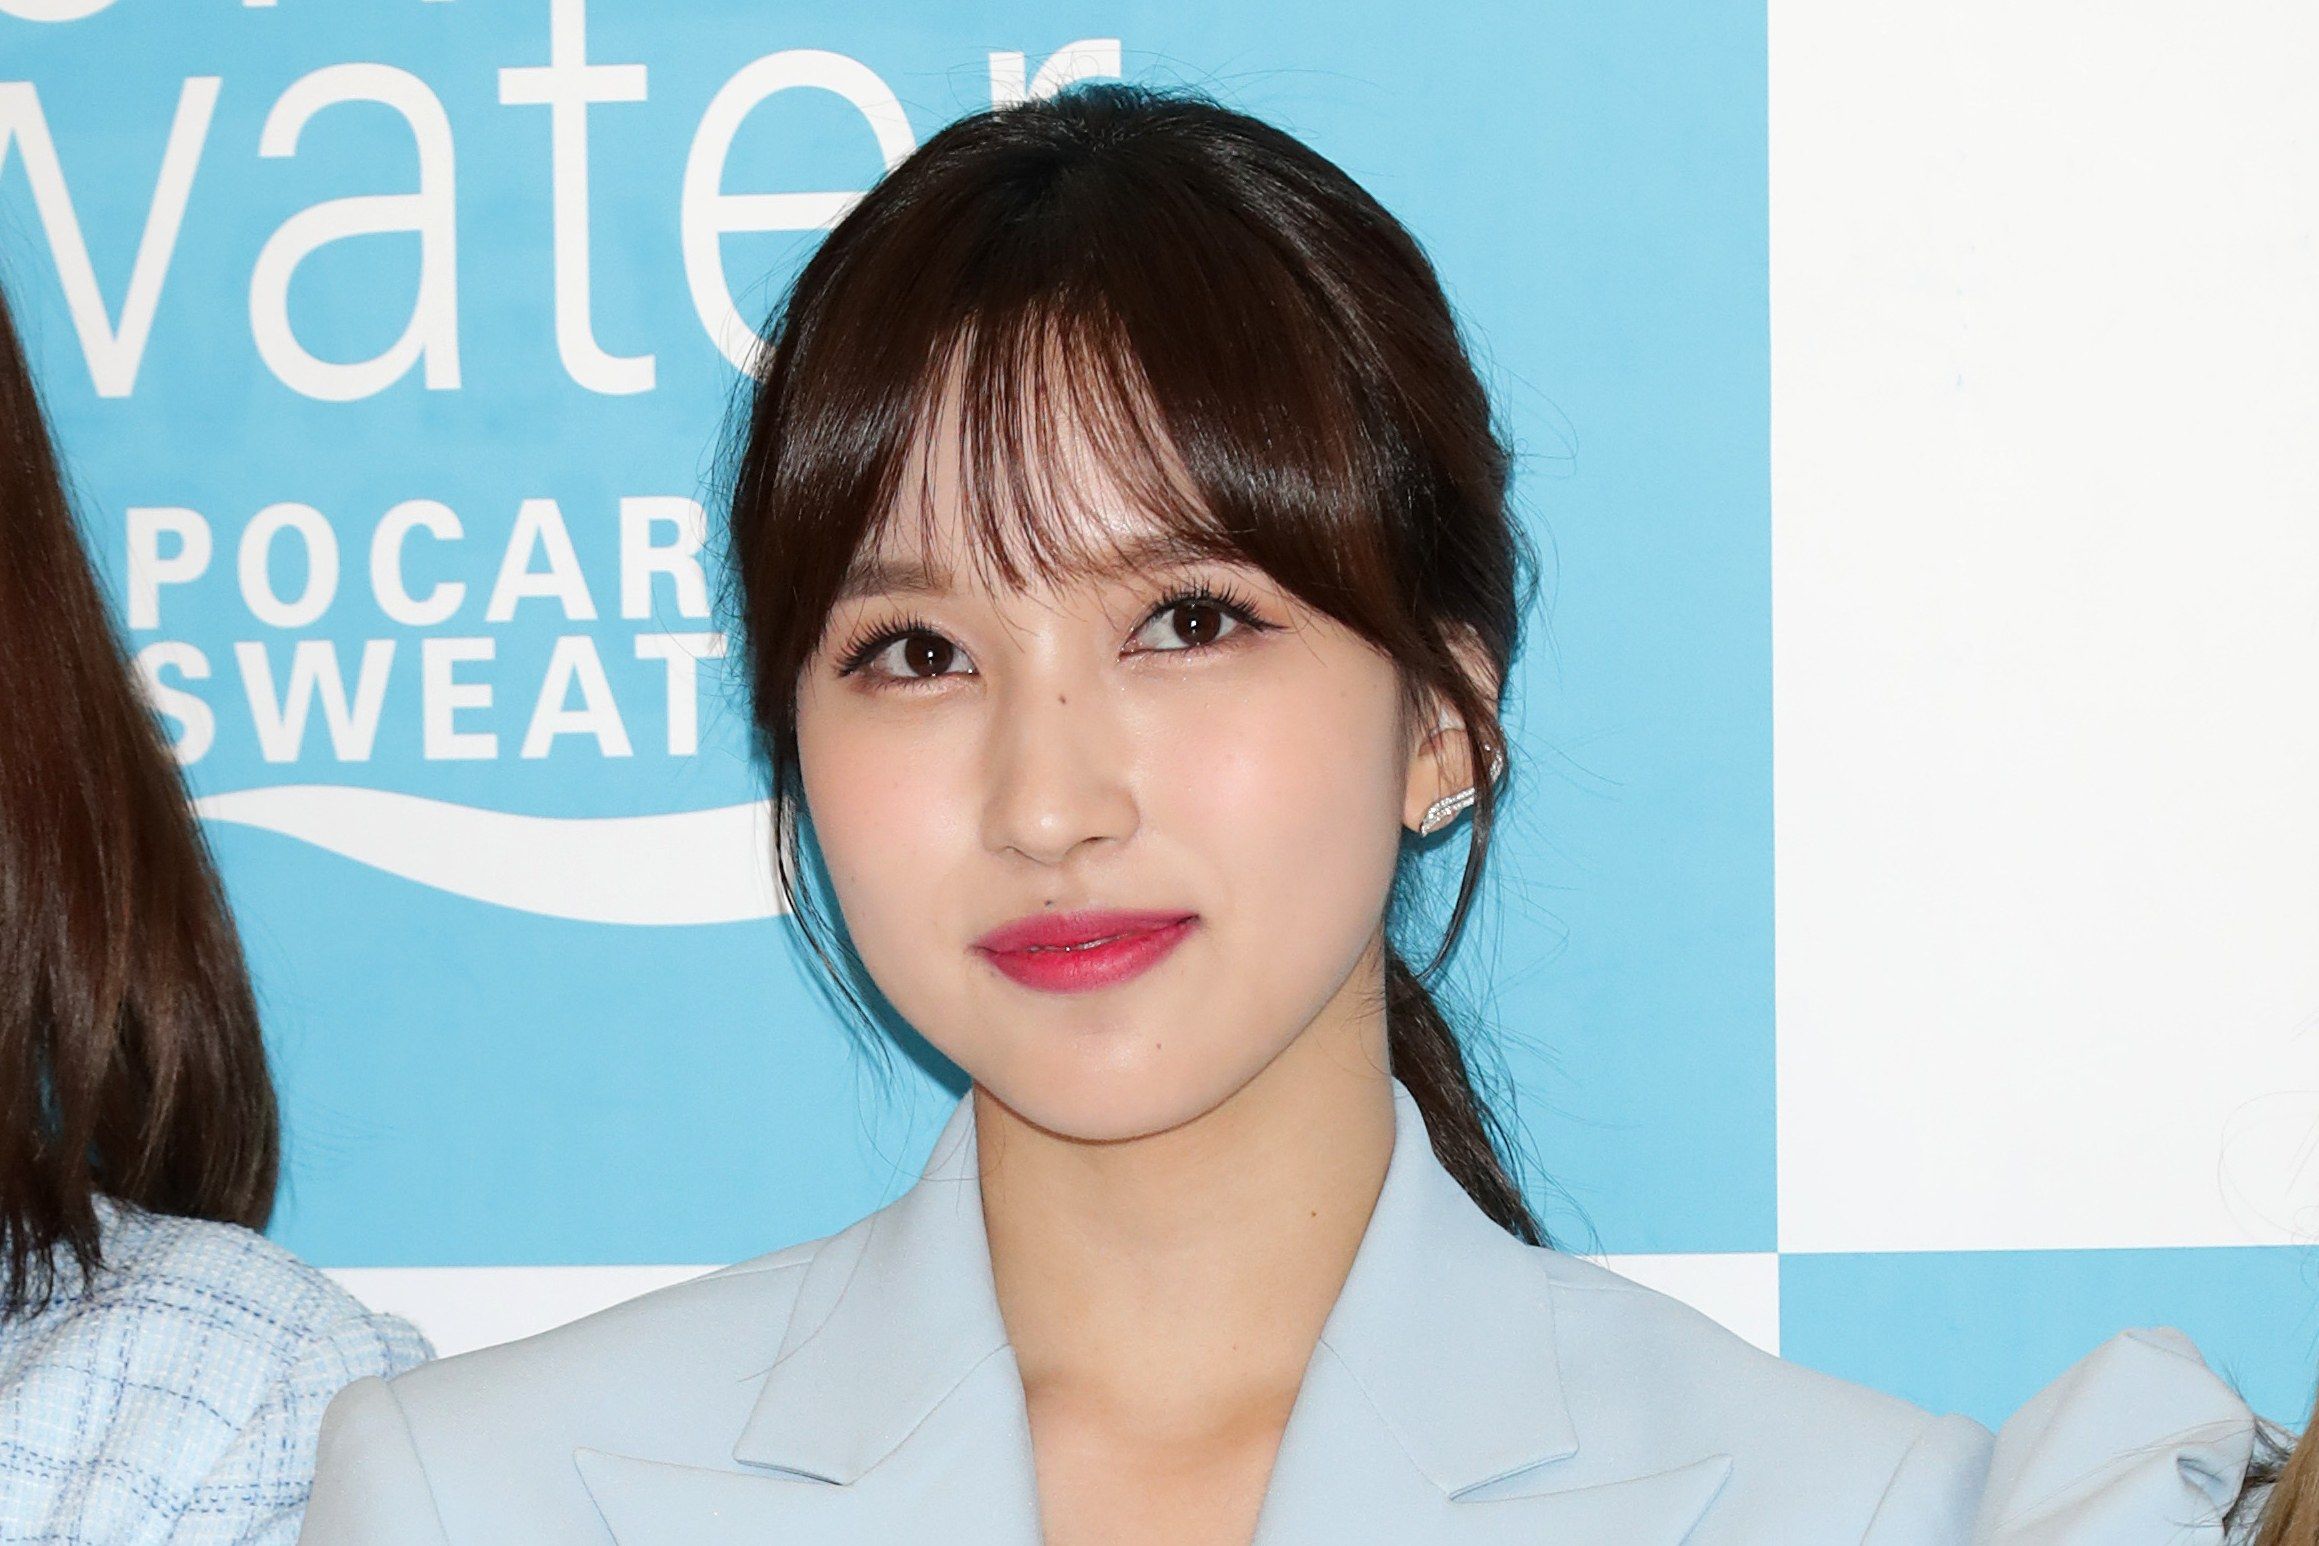 Mina Of K Pop Group's Twice To Sit Out World Tour For Sudden